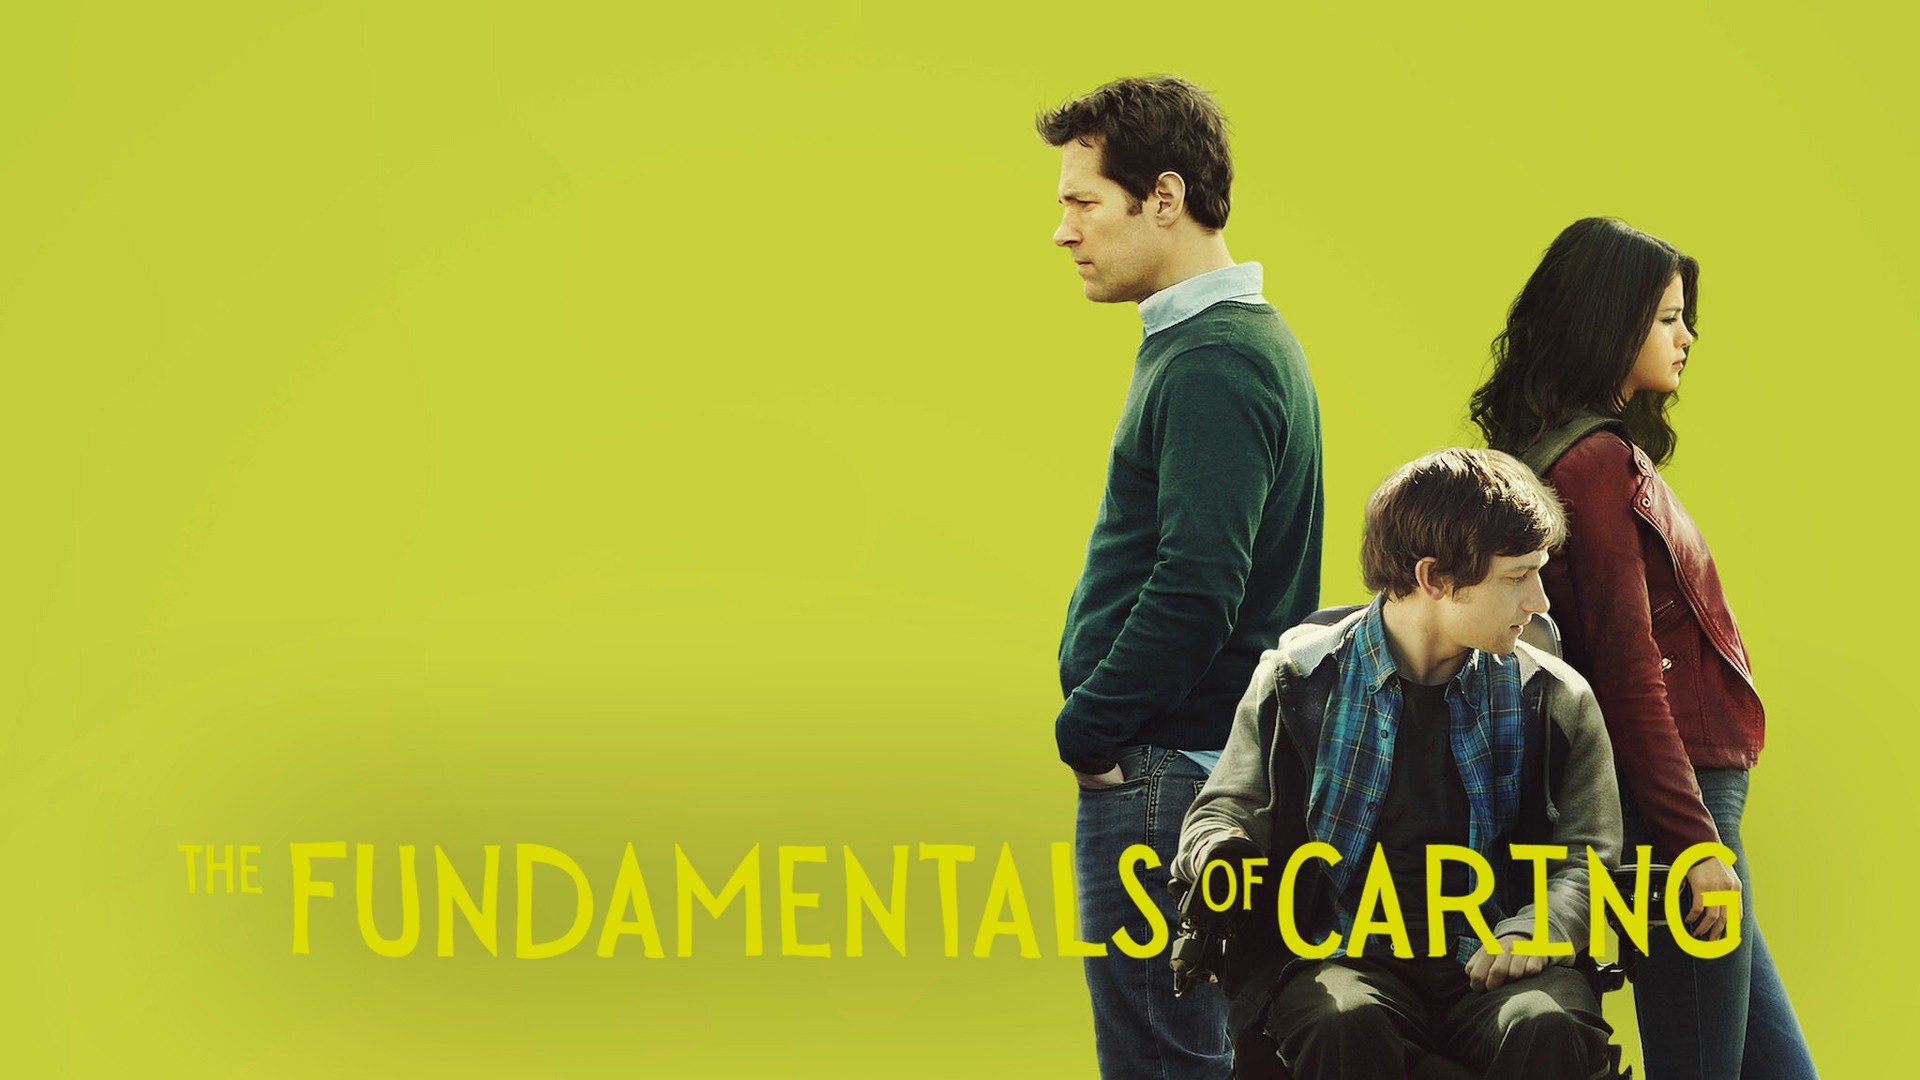 The Fundamentals of Caring - Rotten Tomatoes